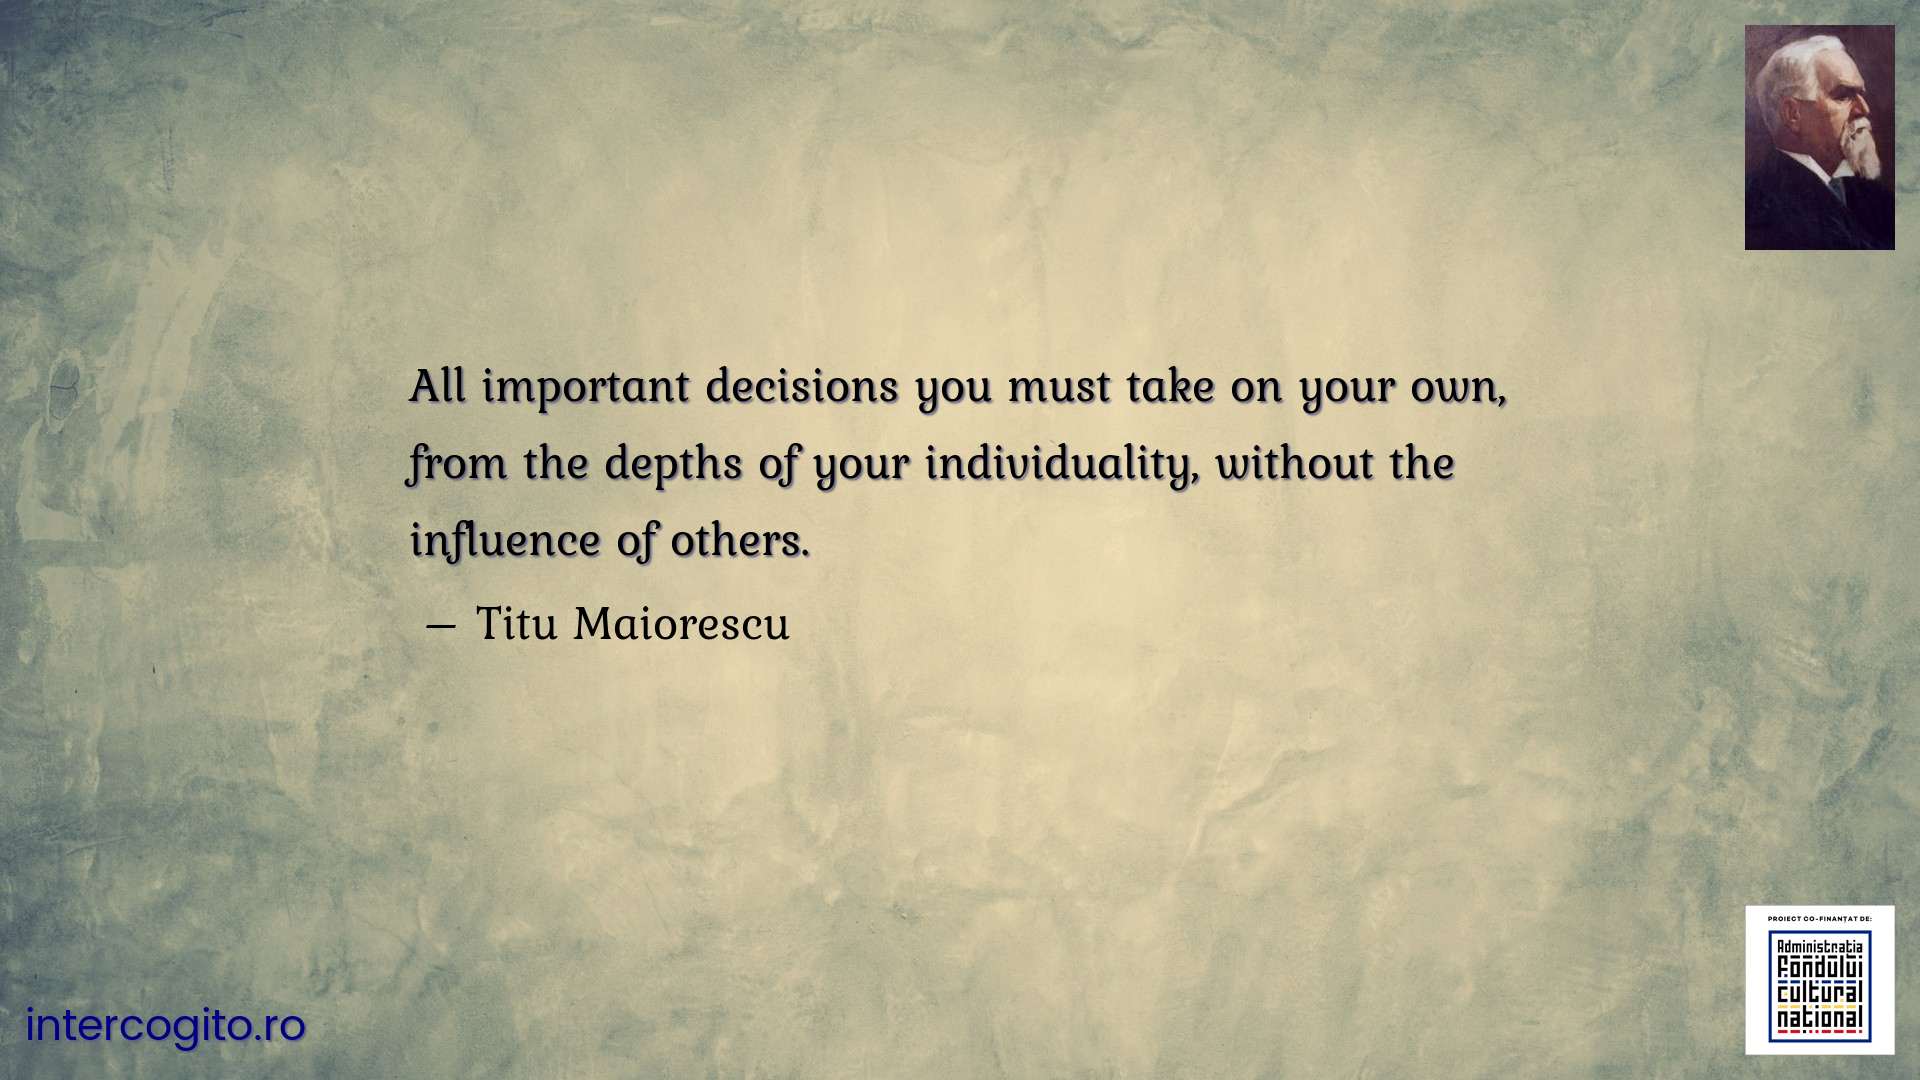 All important decisions you must take on your own, from the depths of your individuality, without the influence of others.